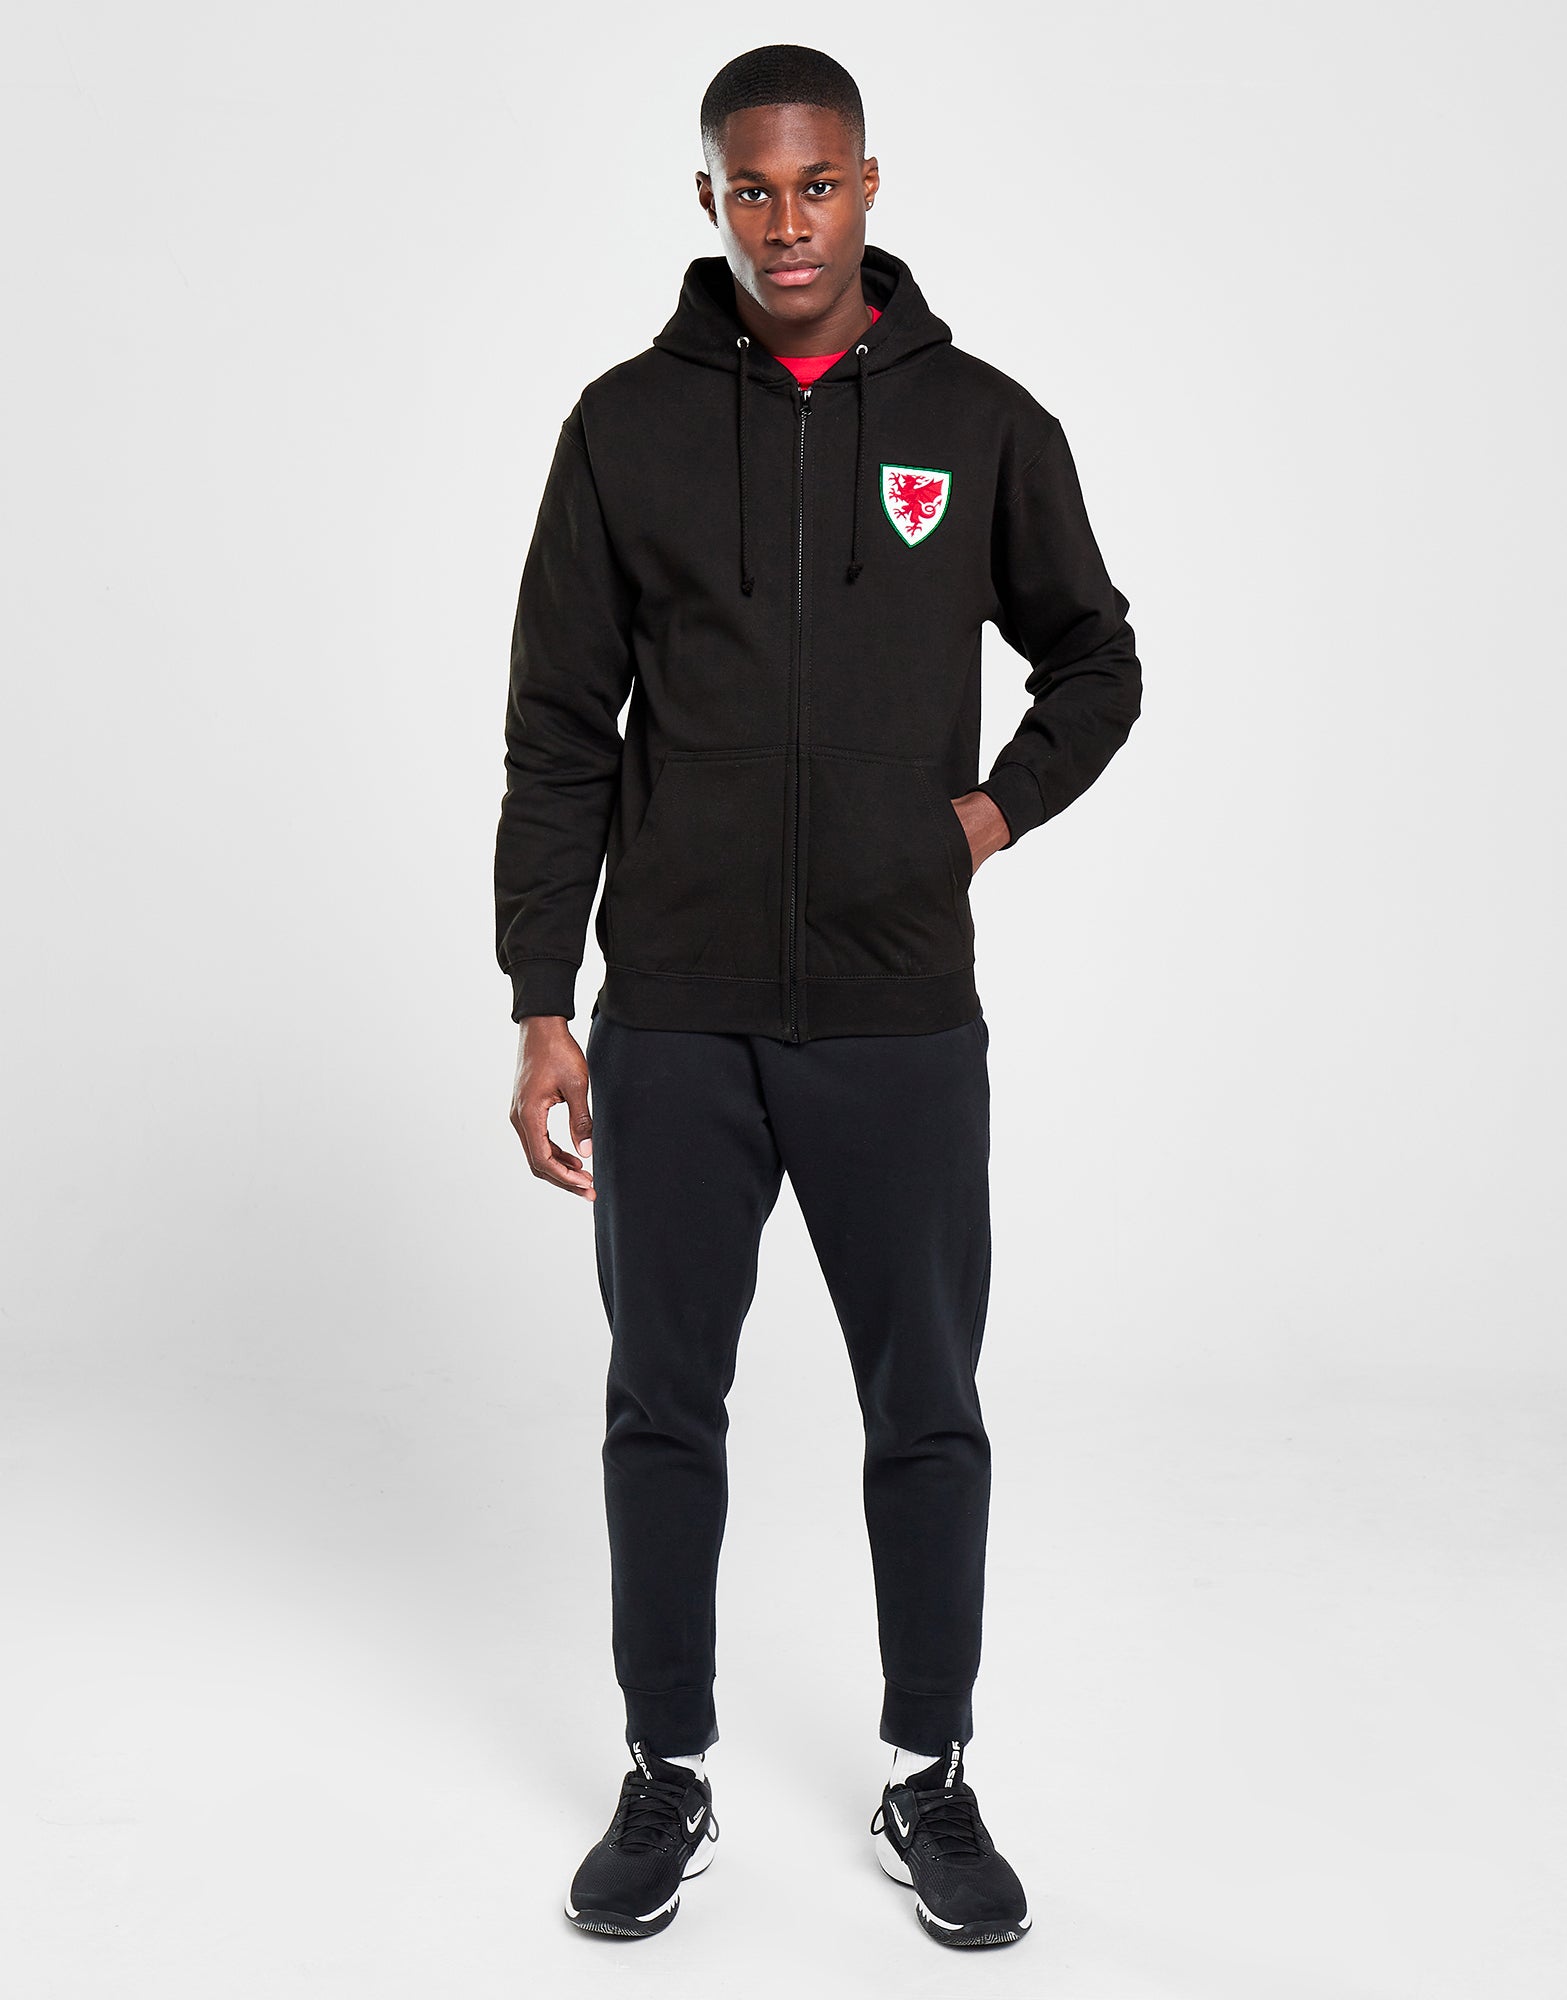 Official Team Wales Full Zip Hoodie - Black - The World Football Store